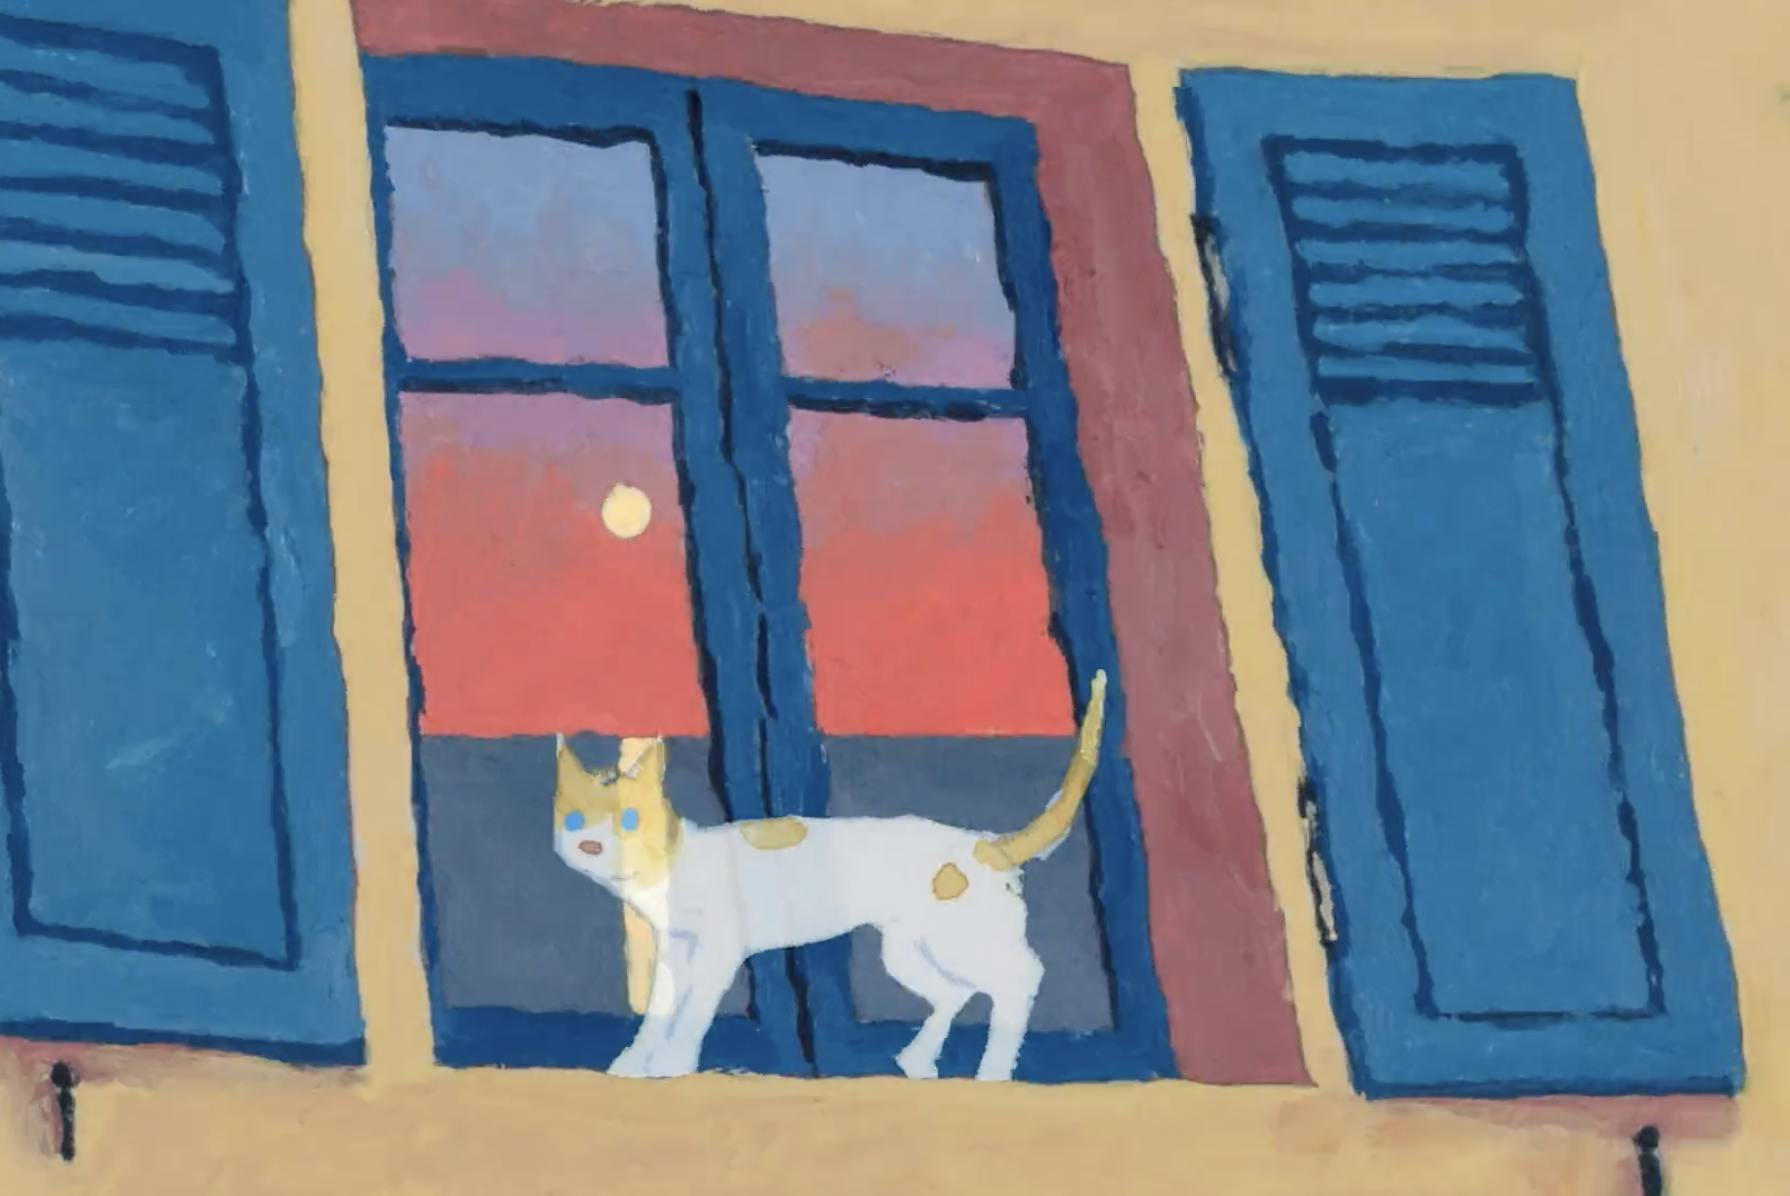 A cat stands in front of a window, the glass panes reflecting the setting sun.